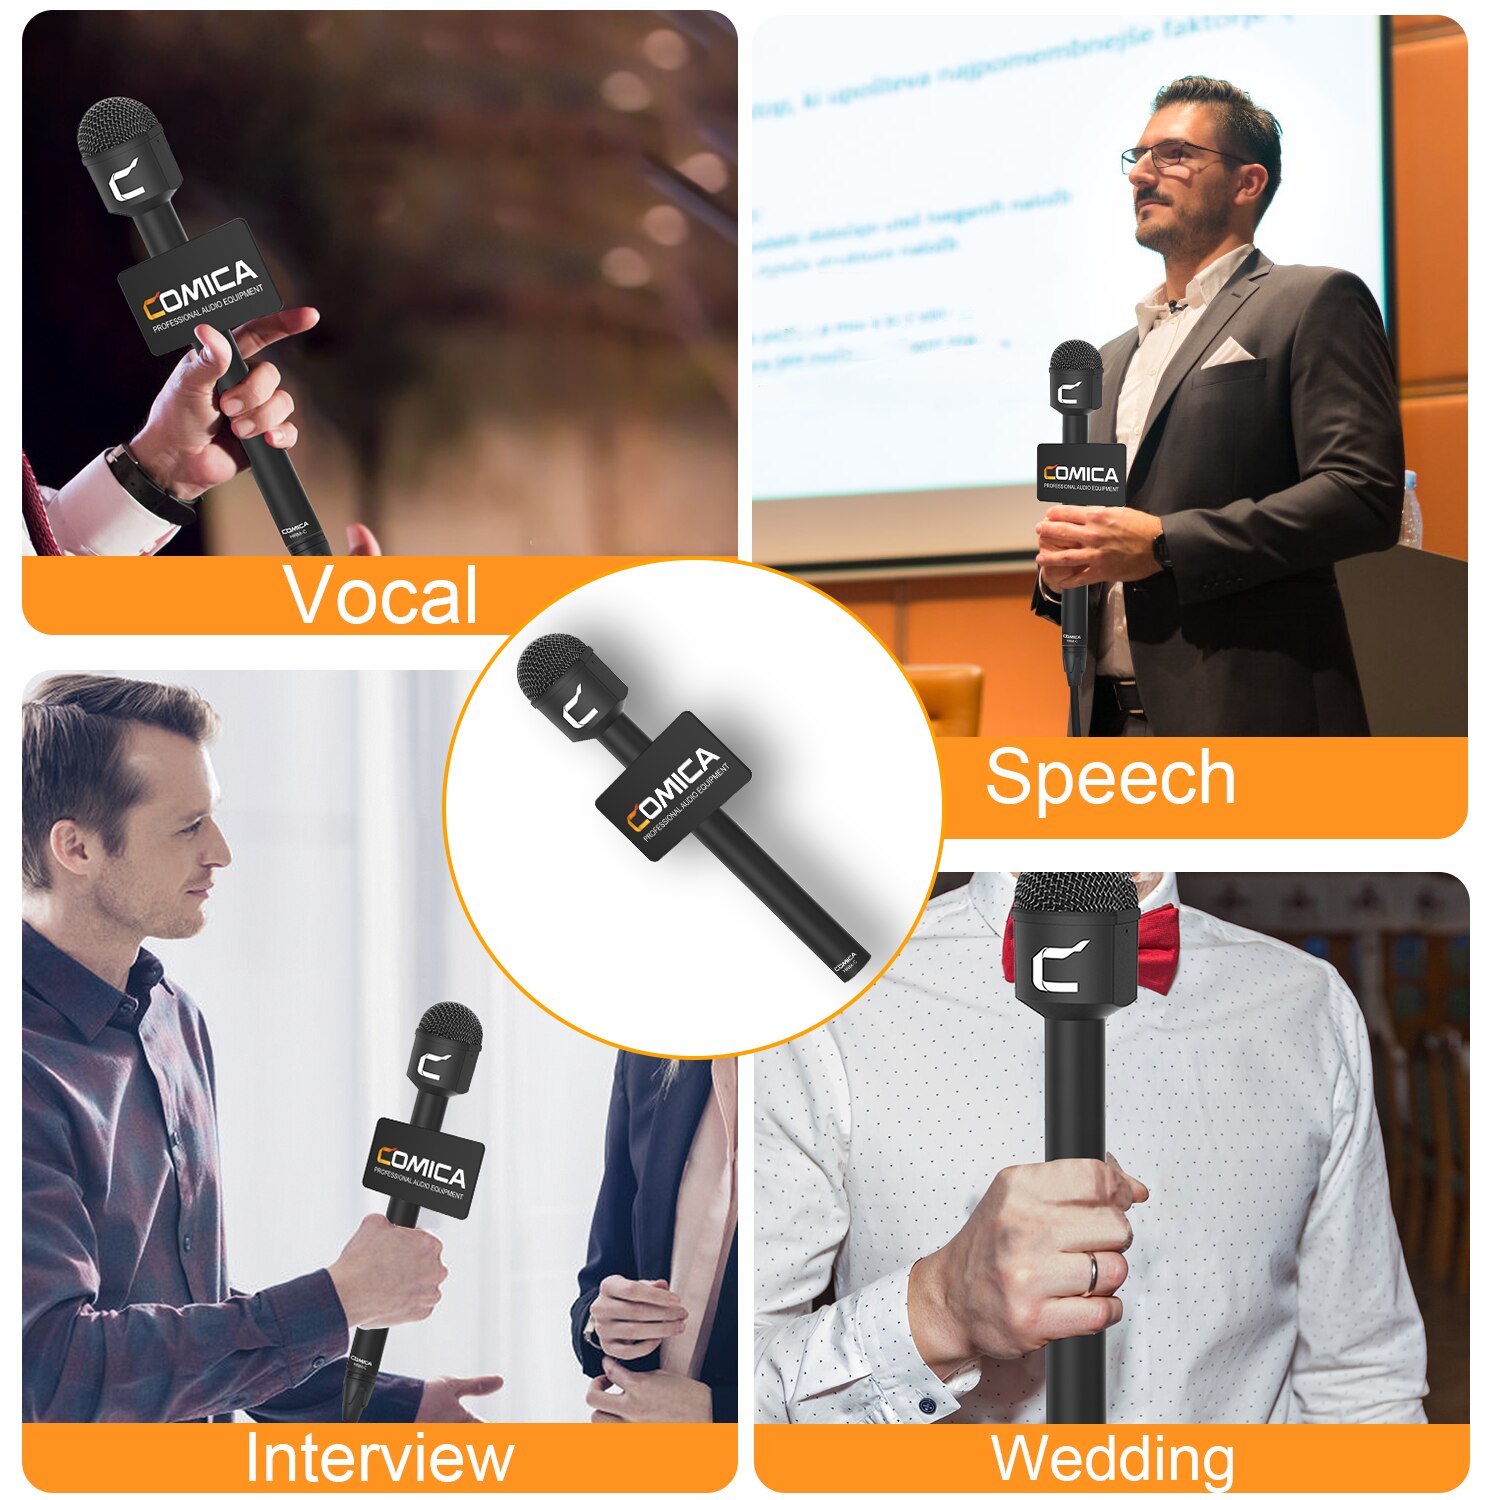 HRM-C Dynamic Handheld Microphone for DSLR Cameras/Camcorders,Reporter Mic for Professional Interview